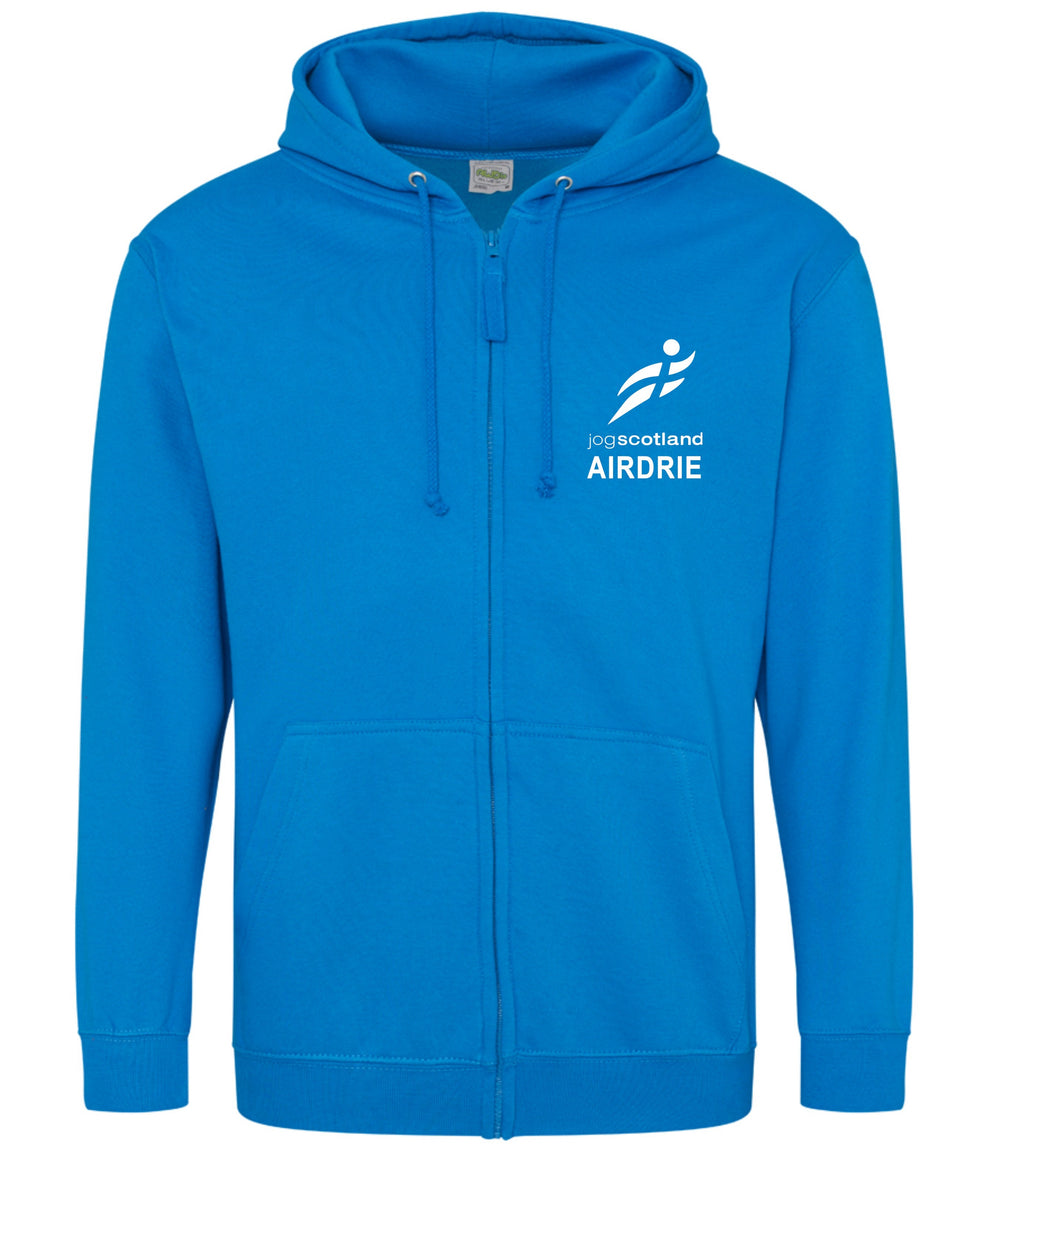 Airdrie JogScotland Zippy Hoody JH050 MALE FIT